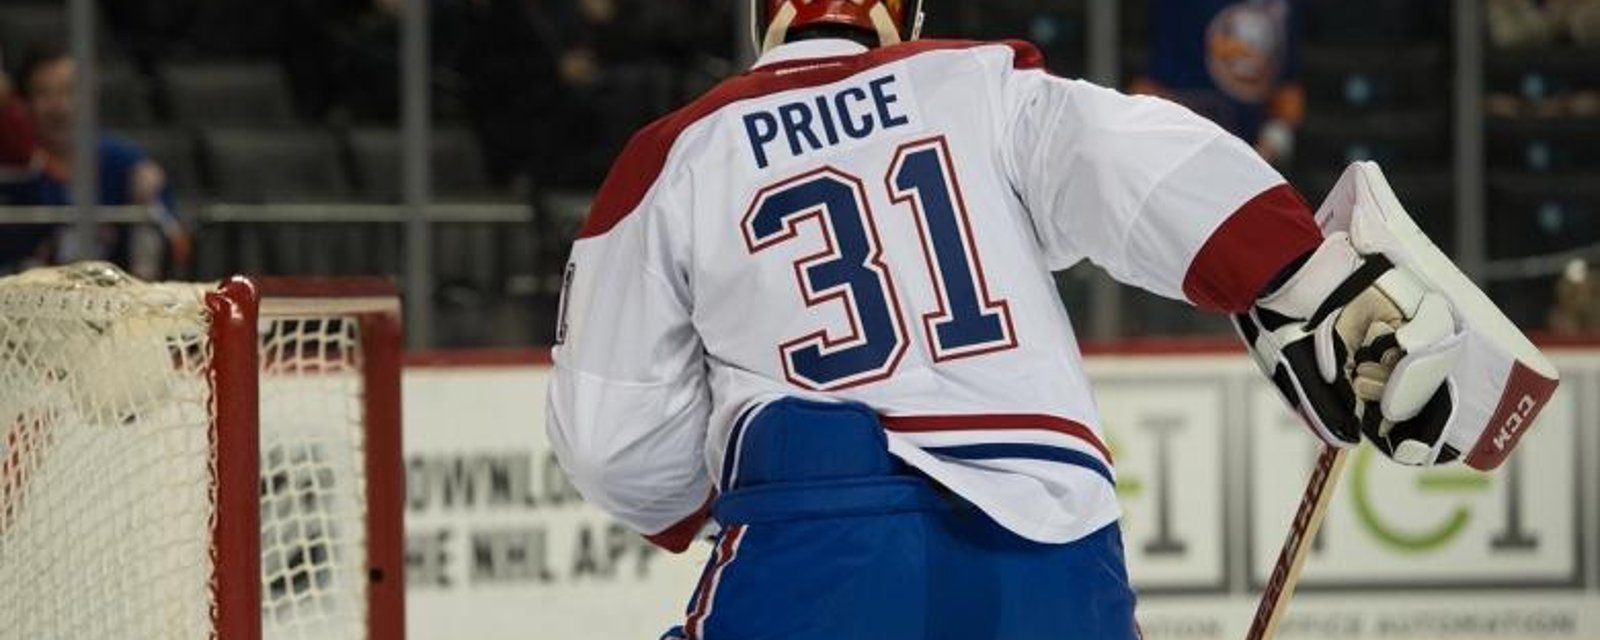 Breaking: A MAJOR update on the injured Carey Price.